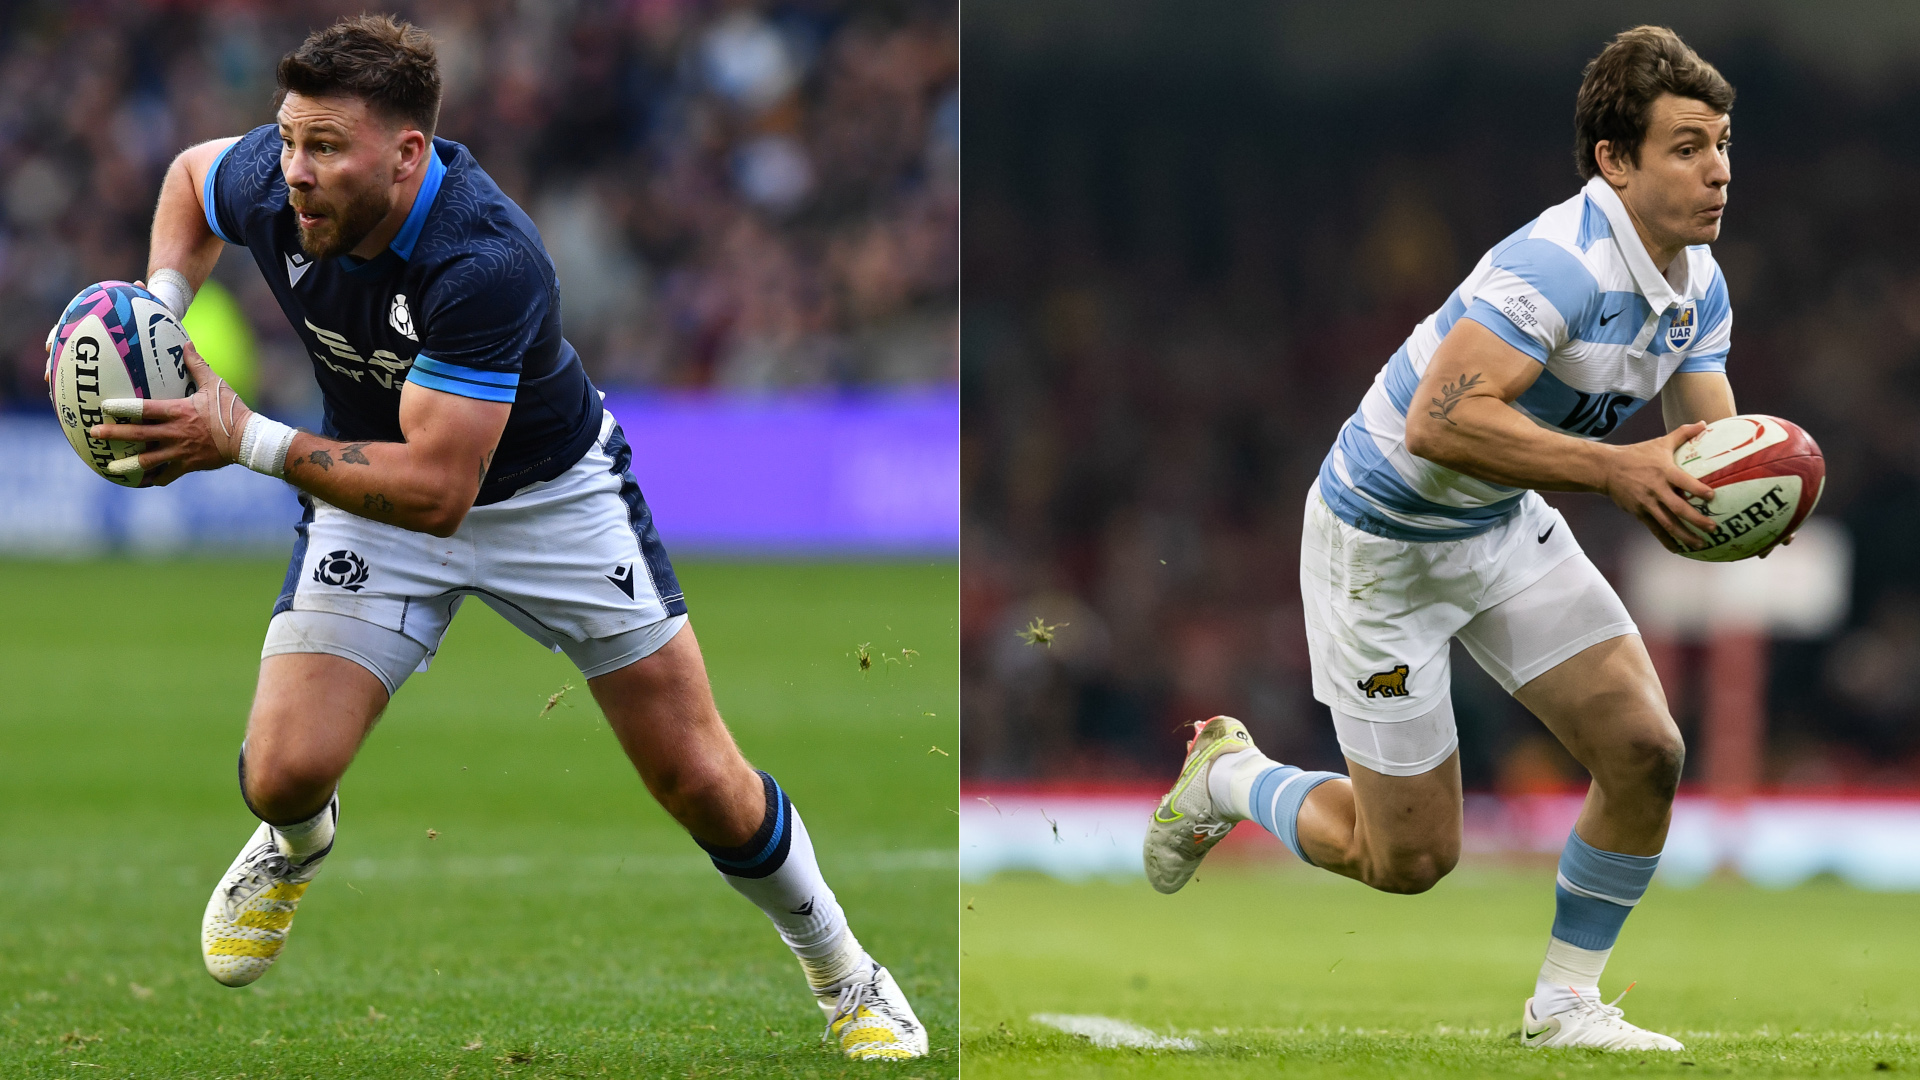 Scotland vs Argentina live stream how to watch Autumn Nations Series rugby from anywhere today TechRadar